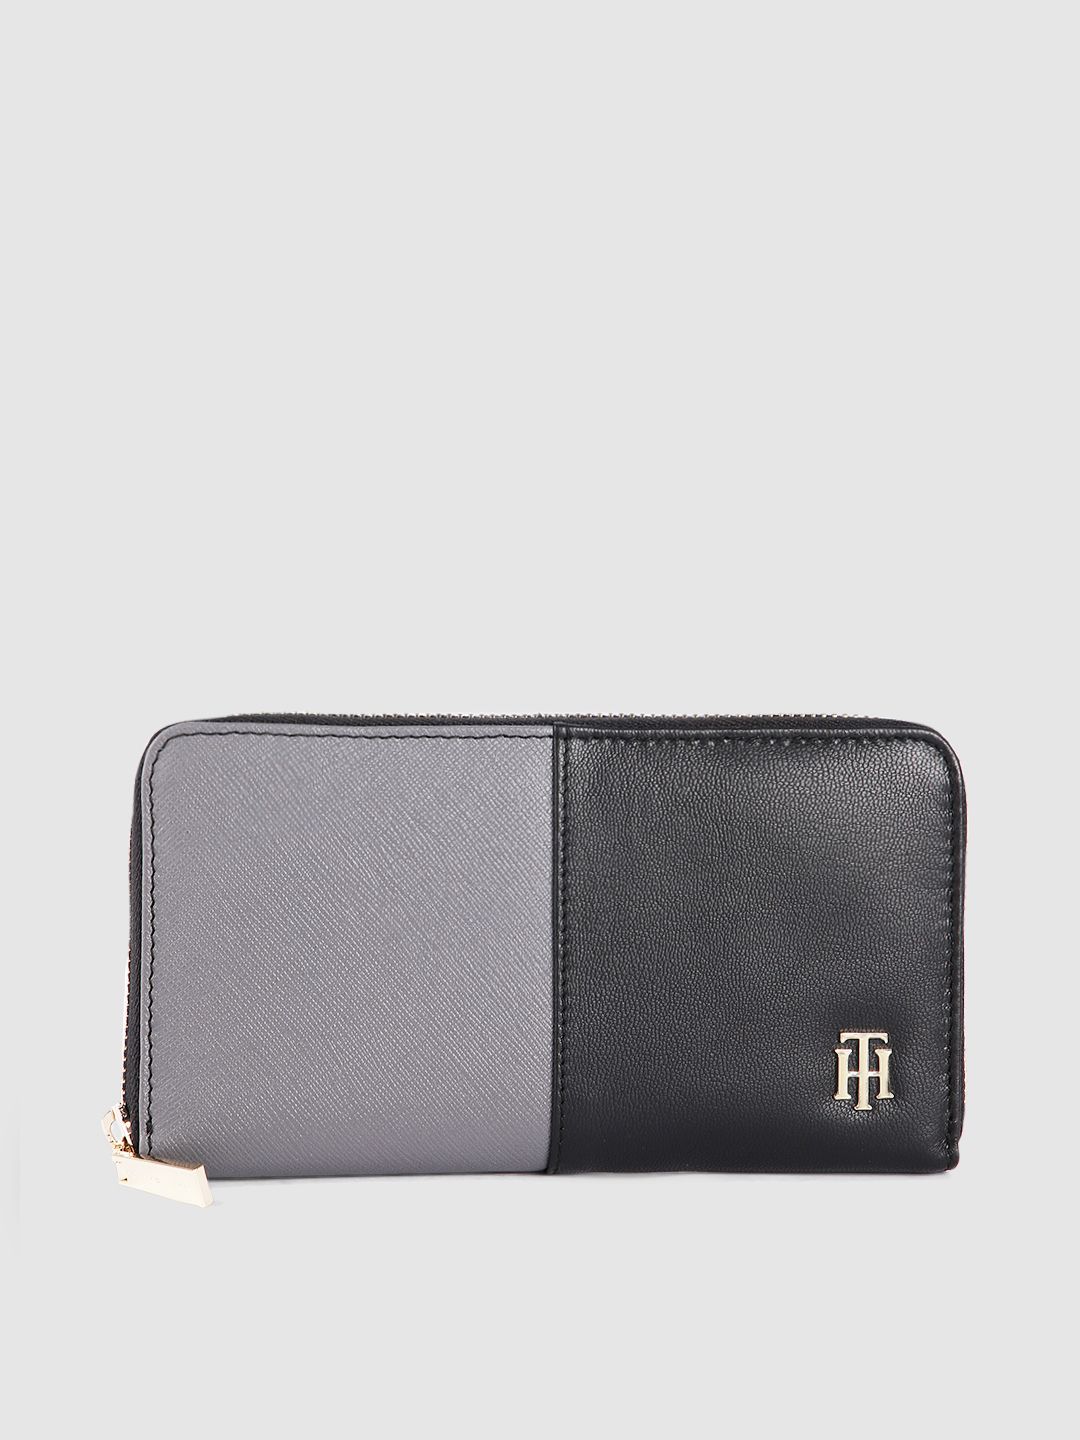 Tommy Hilfiger Women Grey & Black Colourblocked Leather Zip Around Wallet Price in India